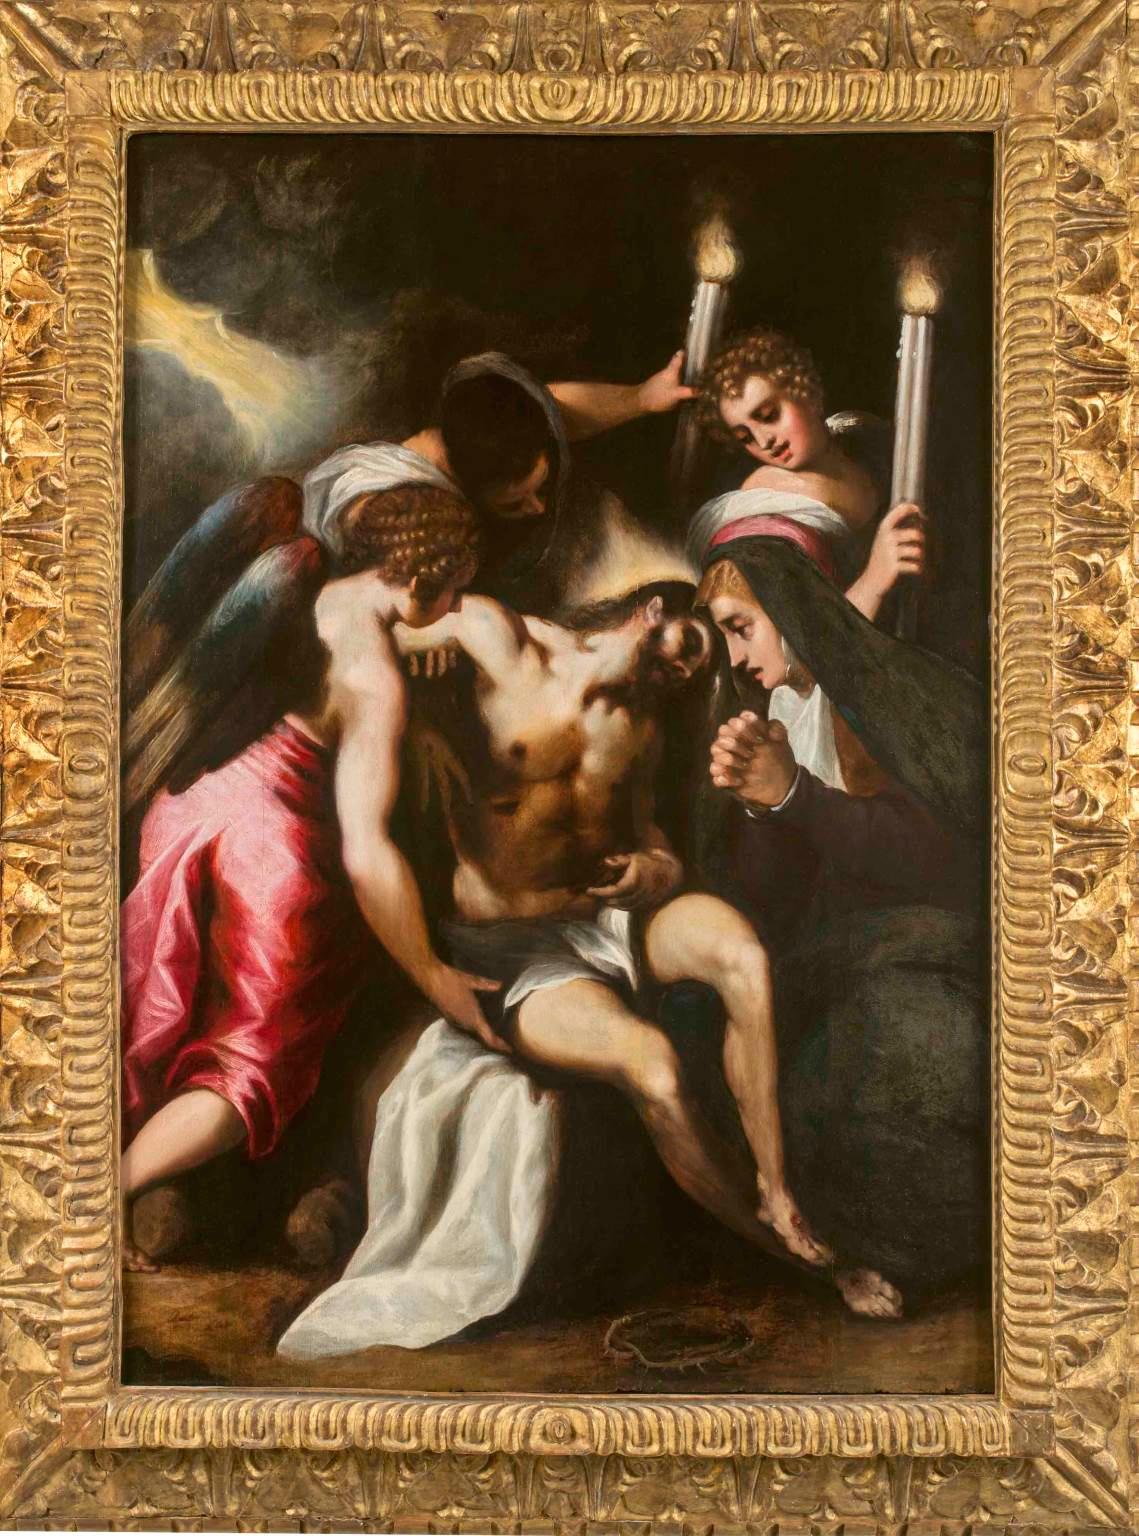 Jacopo Palma il Giovane (circle of) Figurative Painting - Palma Giovane Atelier Religious Christ Mannerism Painting 17th century oil wood